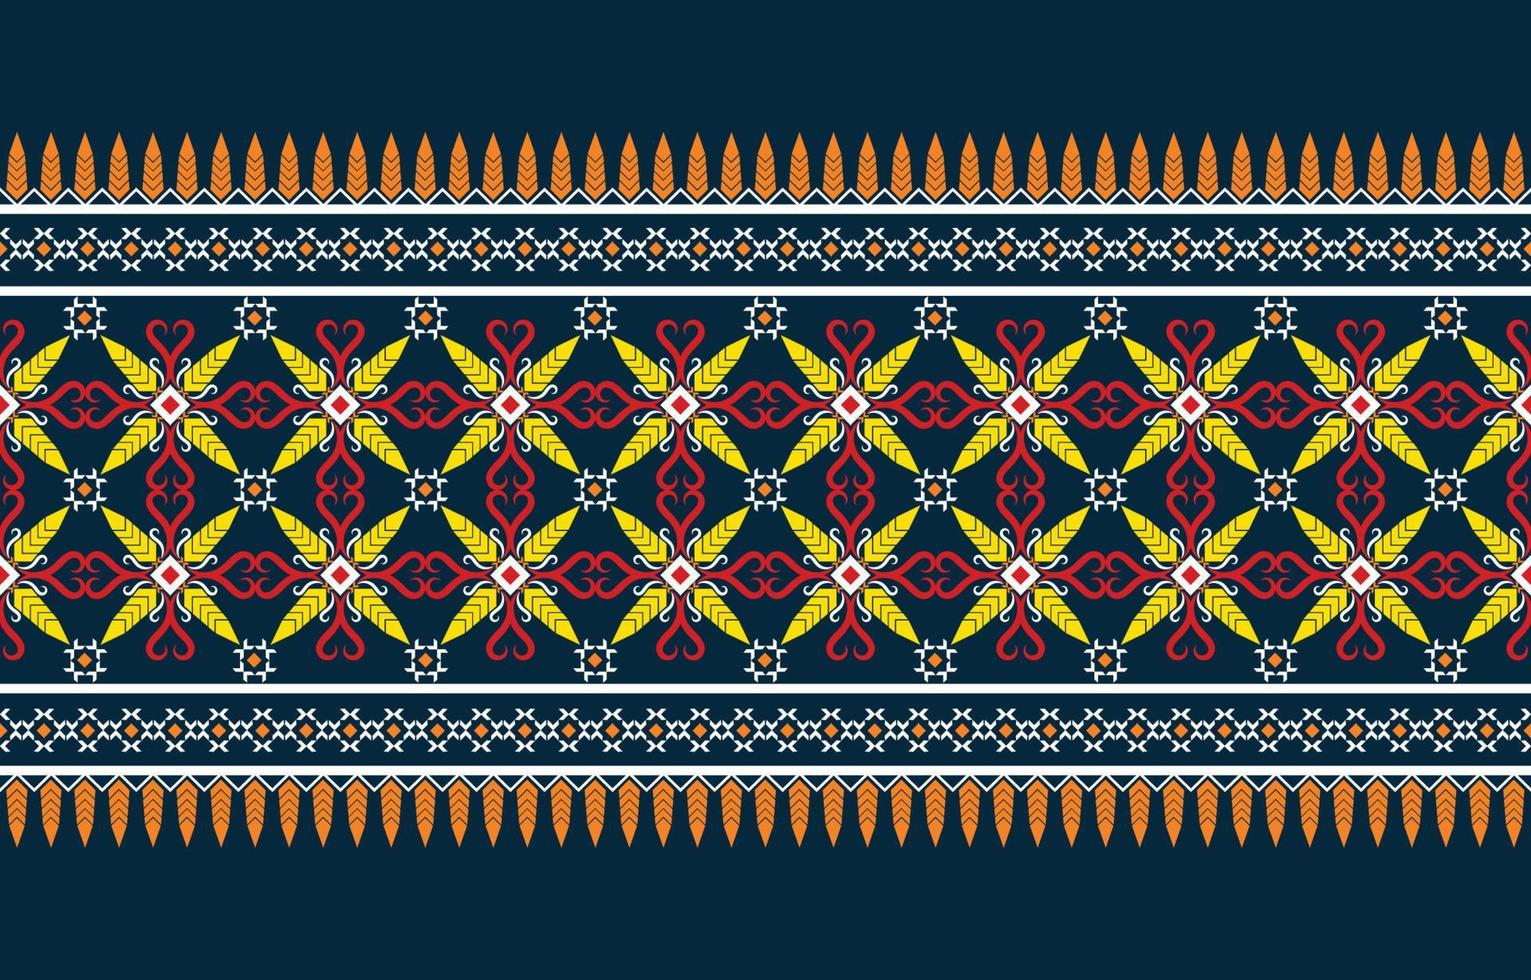 Geometric ethnic oriental ikat seamless pattern traditional Design for background,carpet,wallpaper,clothing,wrapping,batik,fabric,vector illustration. embroidery style. vector